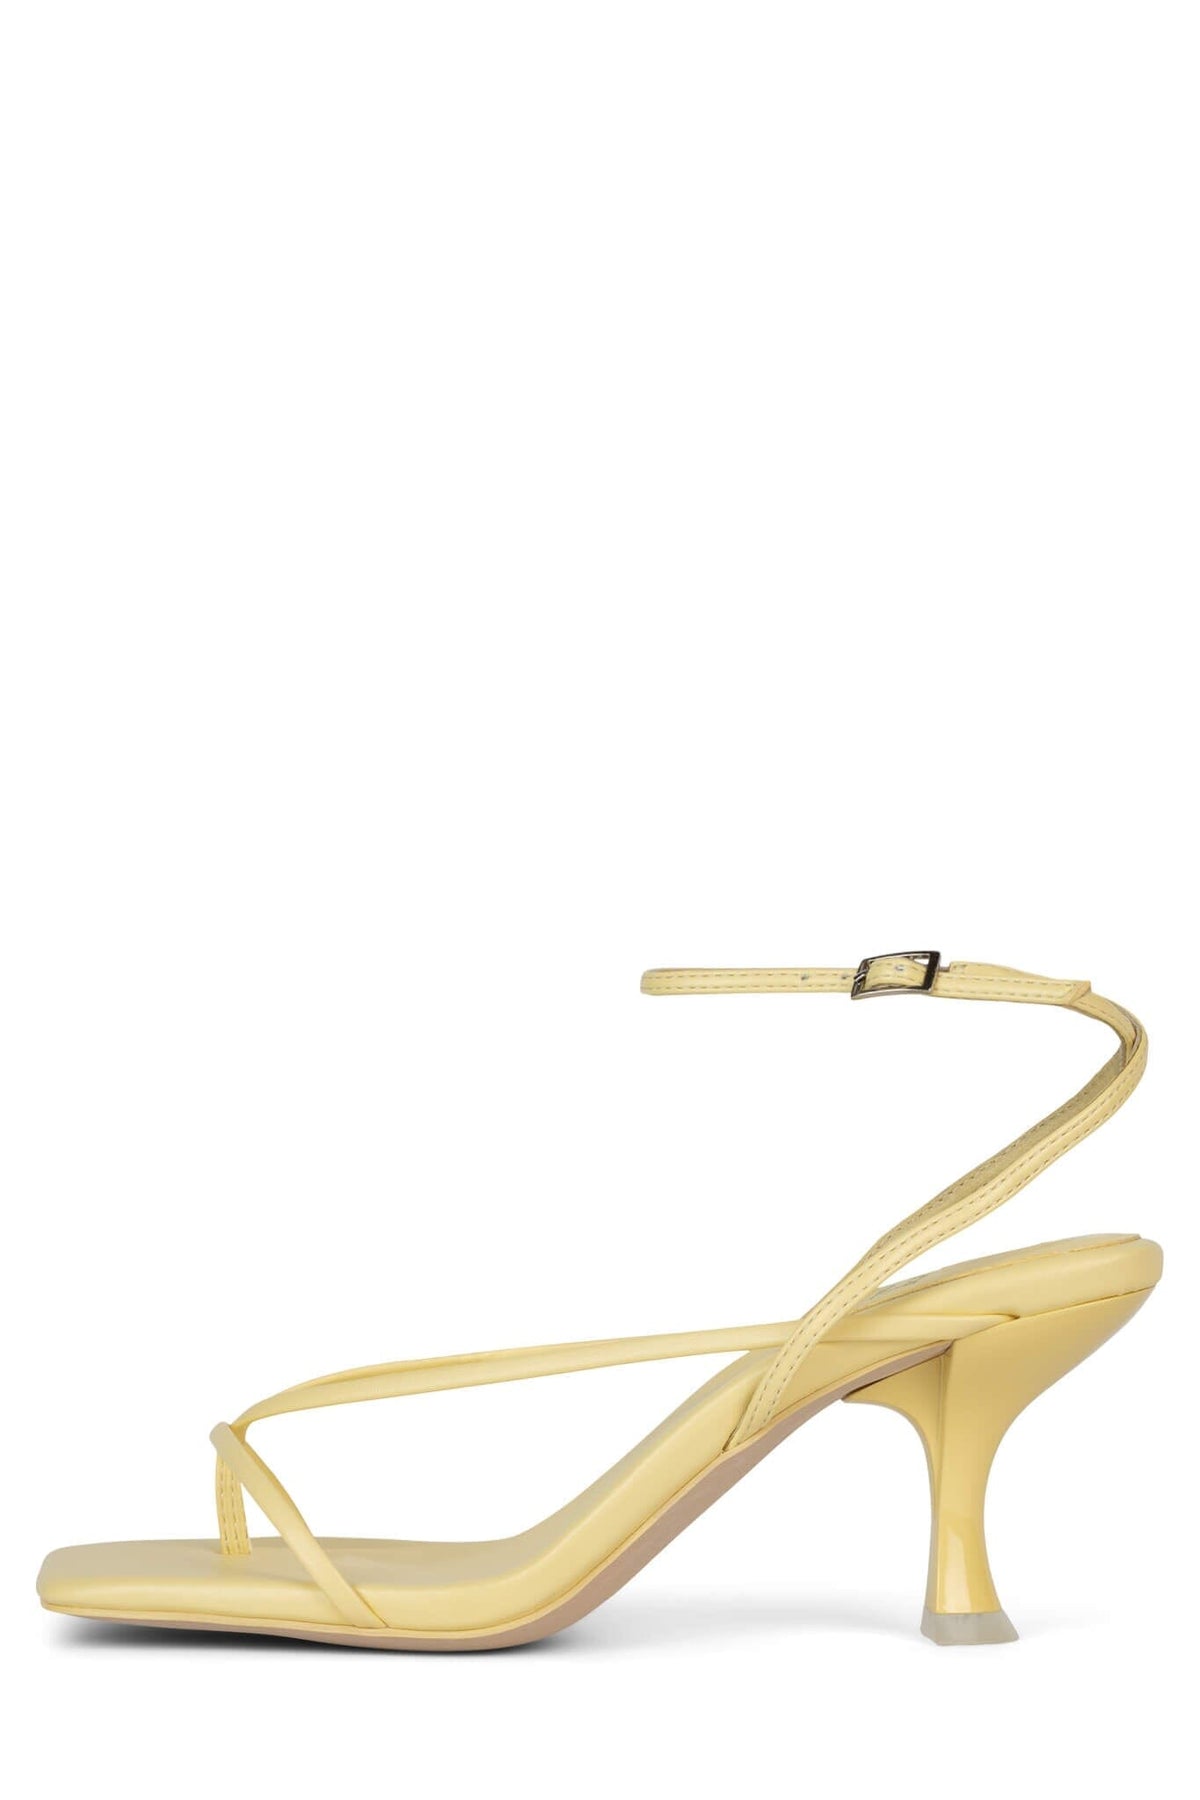 FLUXX Jeffrey Campbell Strappy Sandals Yellow